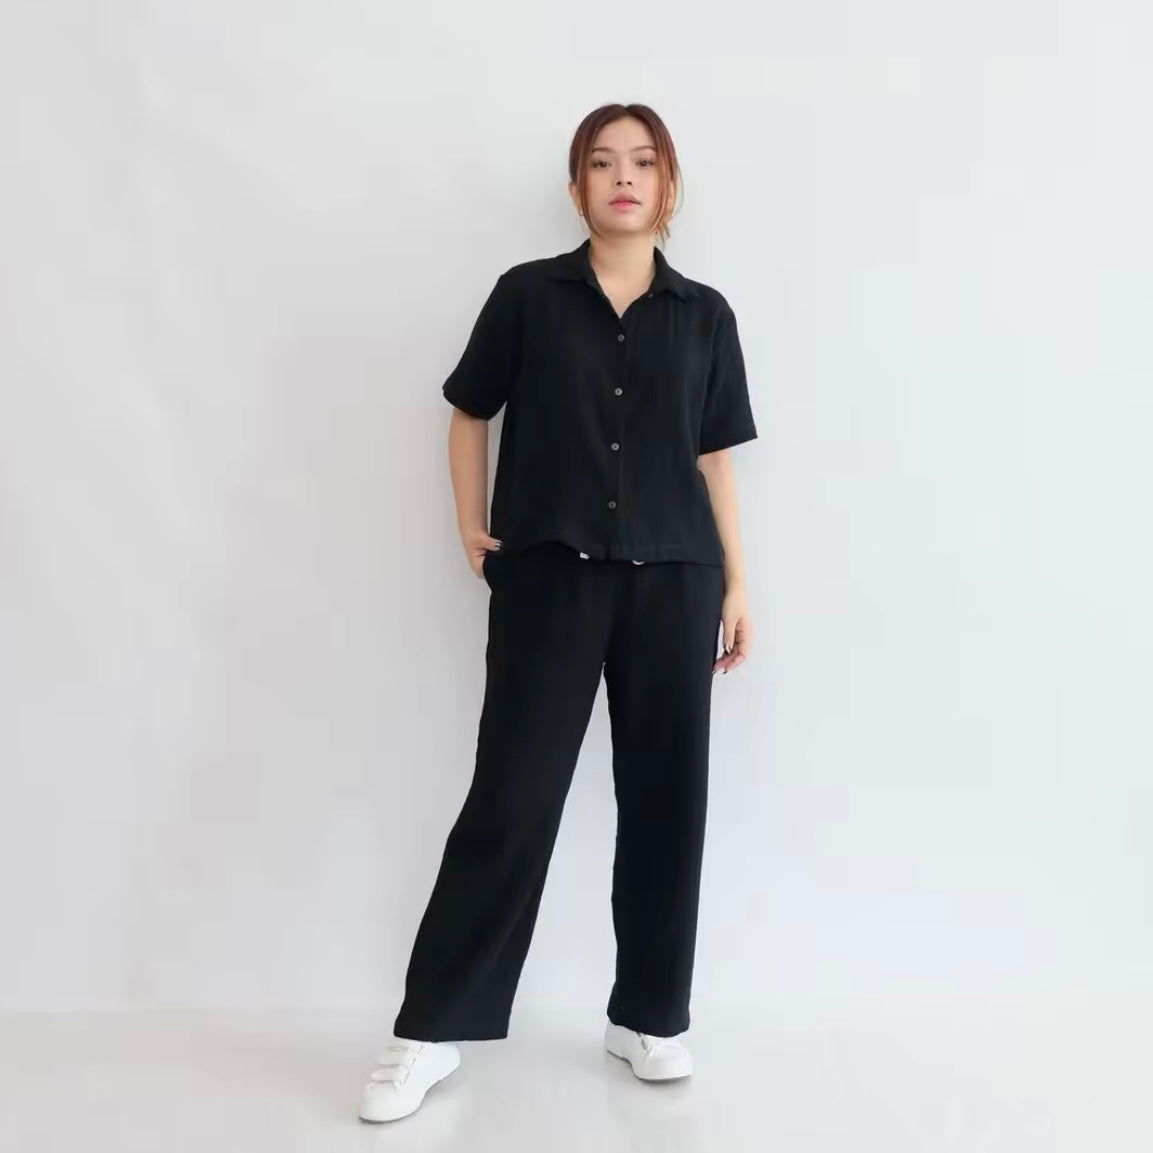 HTP Gauze Buttoned Polo Top and Pants Coordinates with Pocket